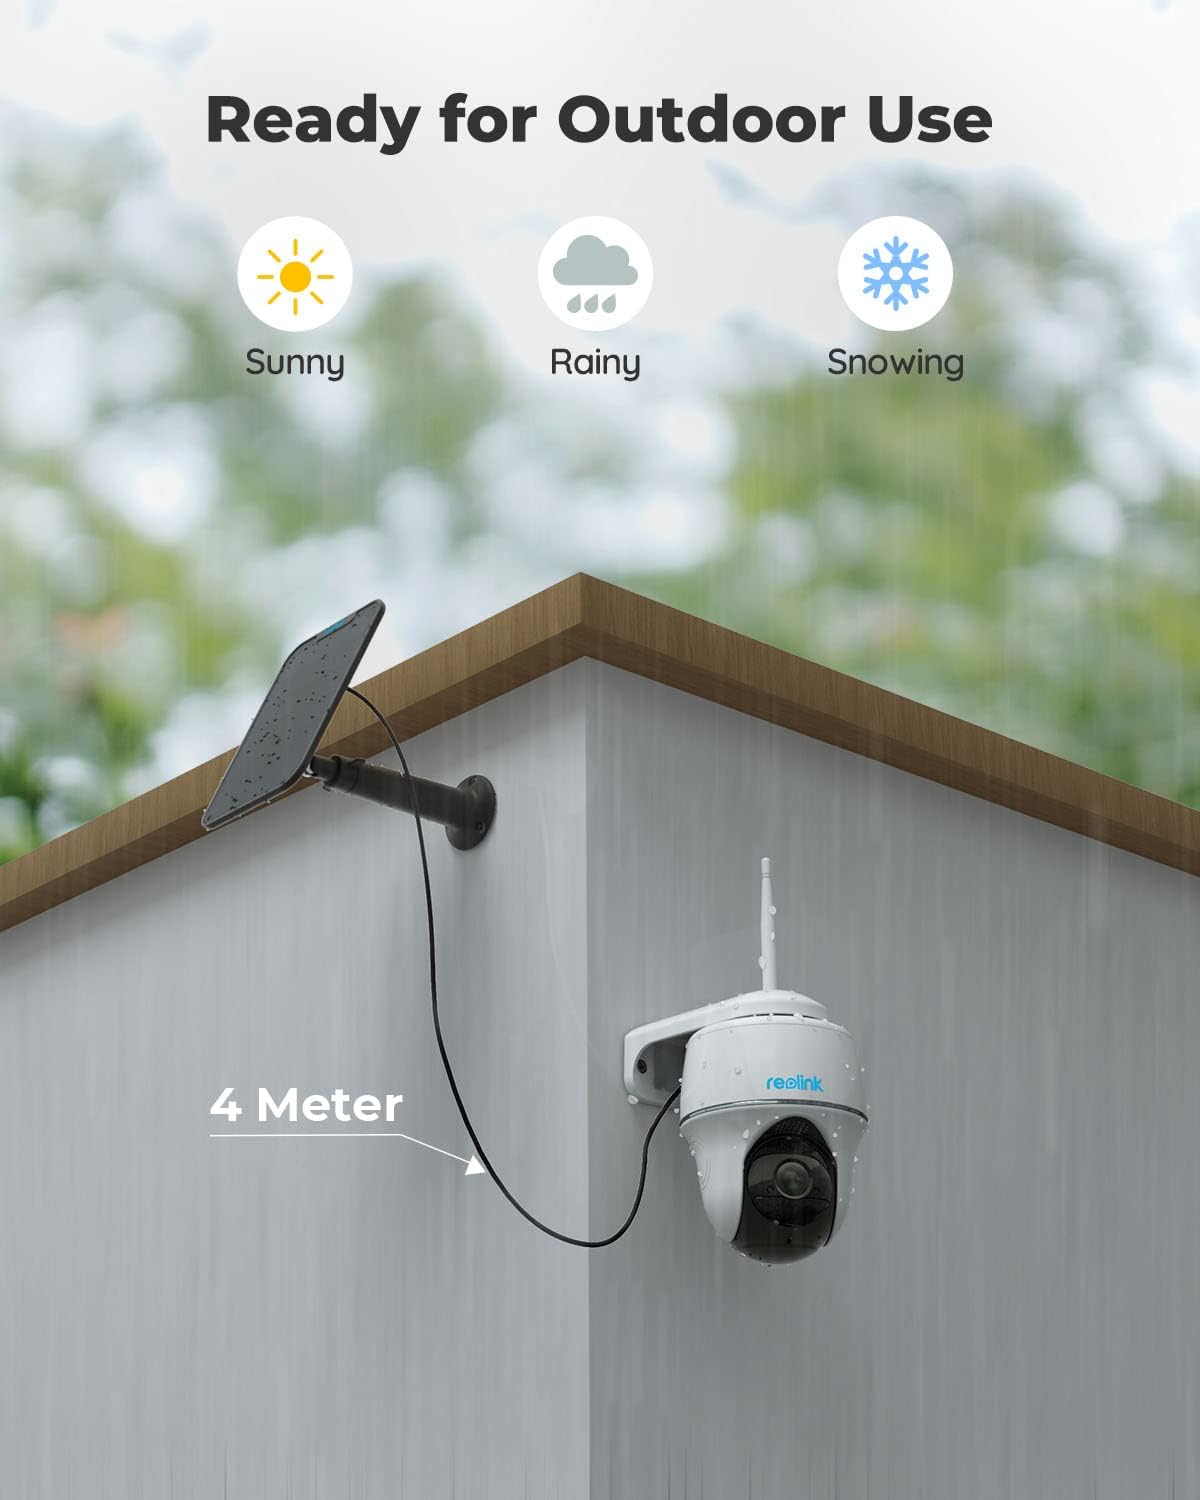 Reolink 4MP Solar Security Camera Outdoor Wireless, No Hub Needed, 2.4/5 GHz WiFi Solar Powered Camera with 360° Pan-Tilt, Person/Vehicle Detection, No Monthly Fee, SD Storage,Argus PT 4MP+Solar Panel (refurbished)